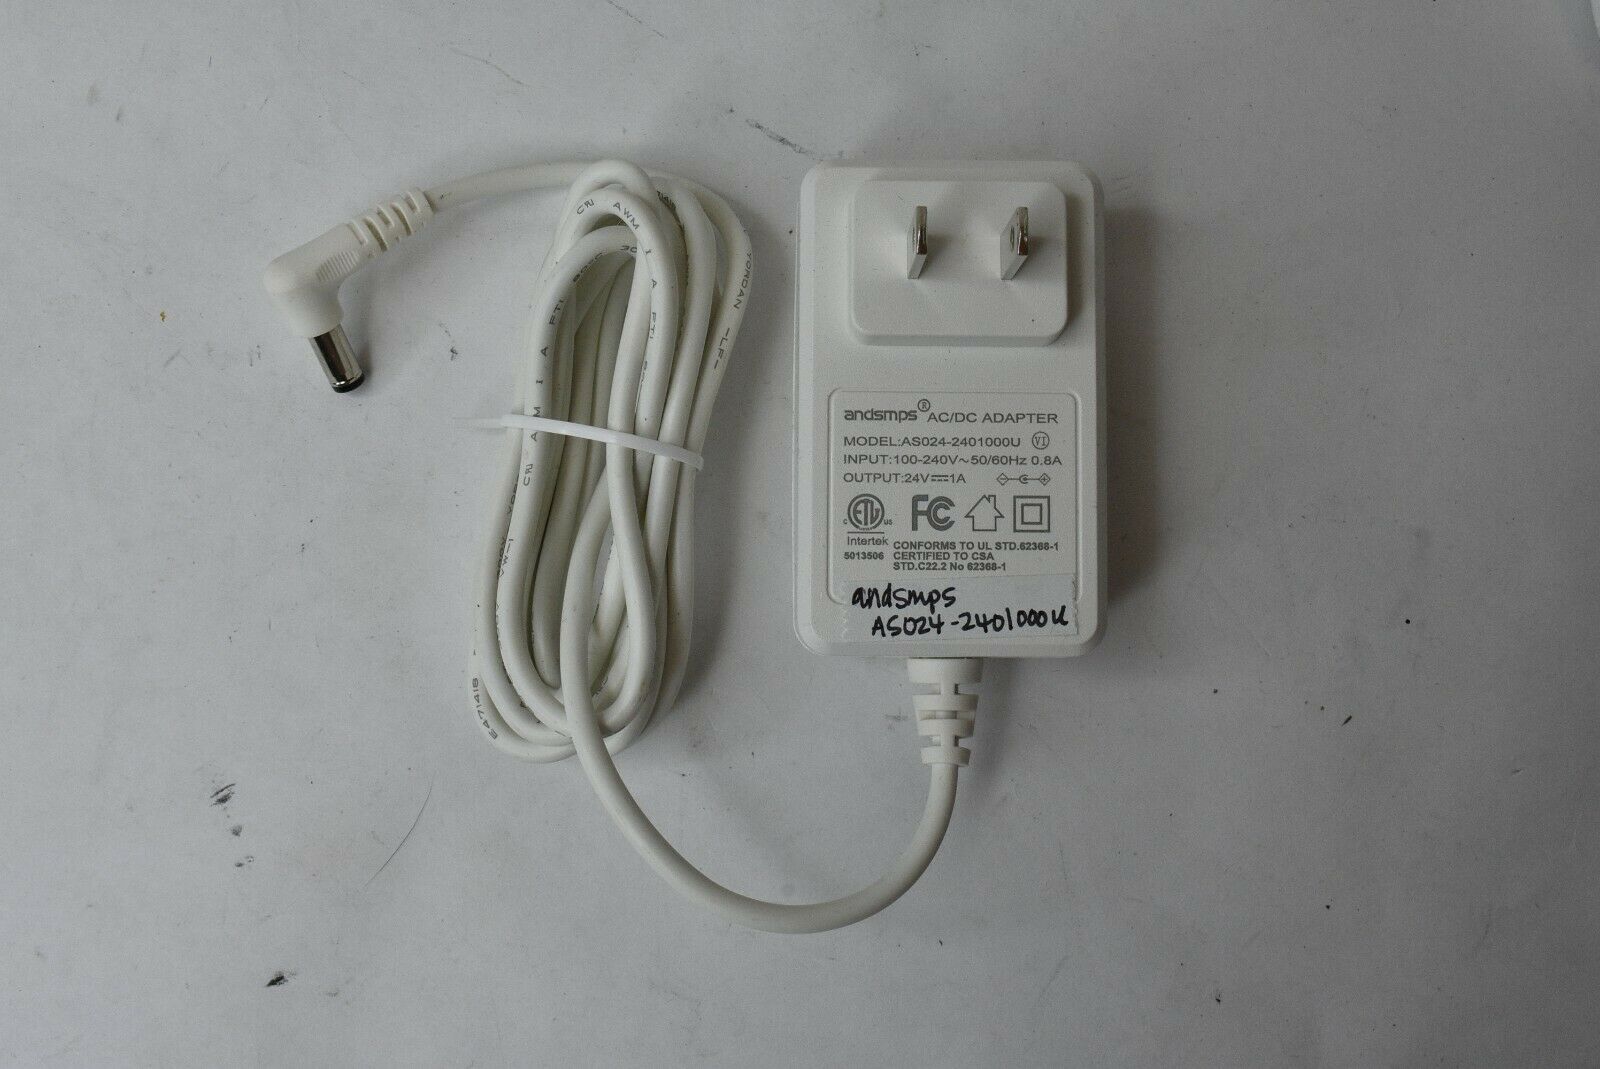 Andsmps AC/DC Adapter Power Supply Unit AS024-2401000U 24V 1A Type: AC/DC Adapter Output Voltage: 24 V Brand: And - Click Image to Close